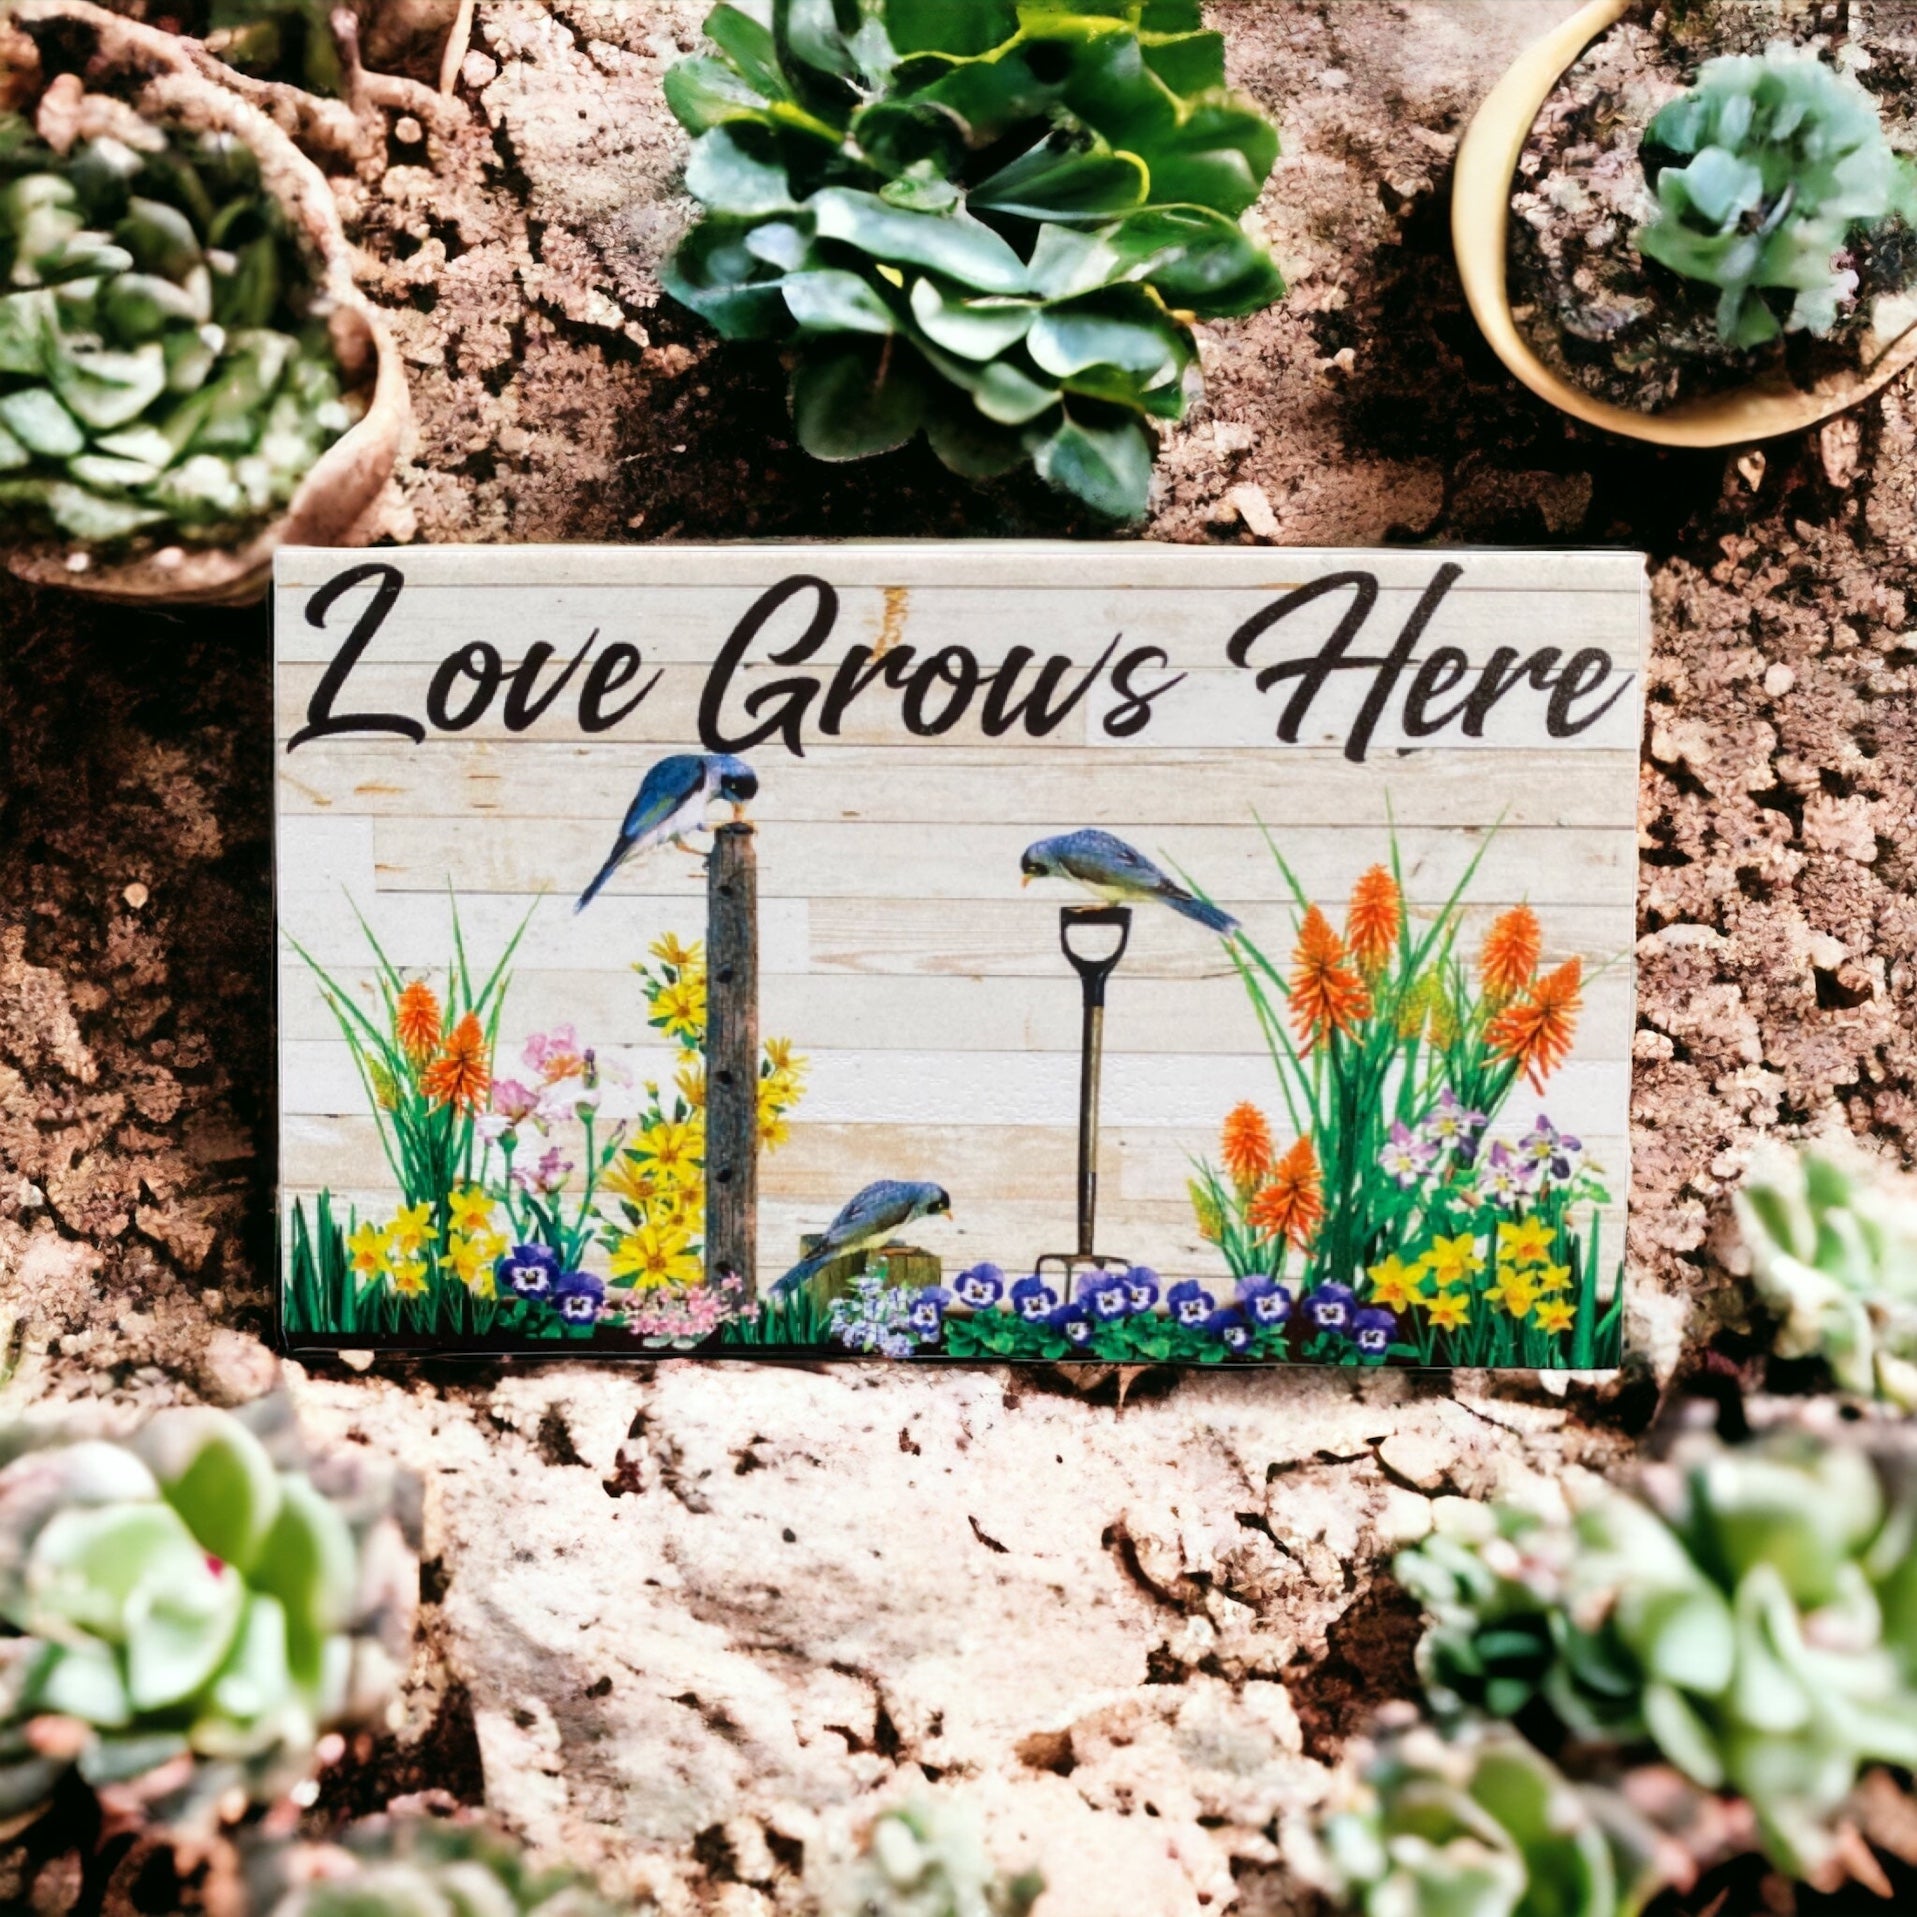 Love Grows Here Birds Flowers Garden Sign - The Renmy Store Homewares & Gifts 